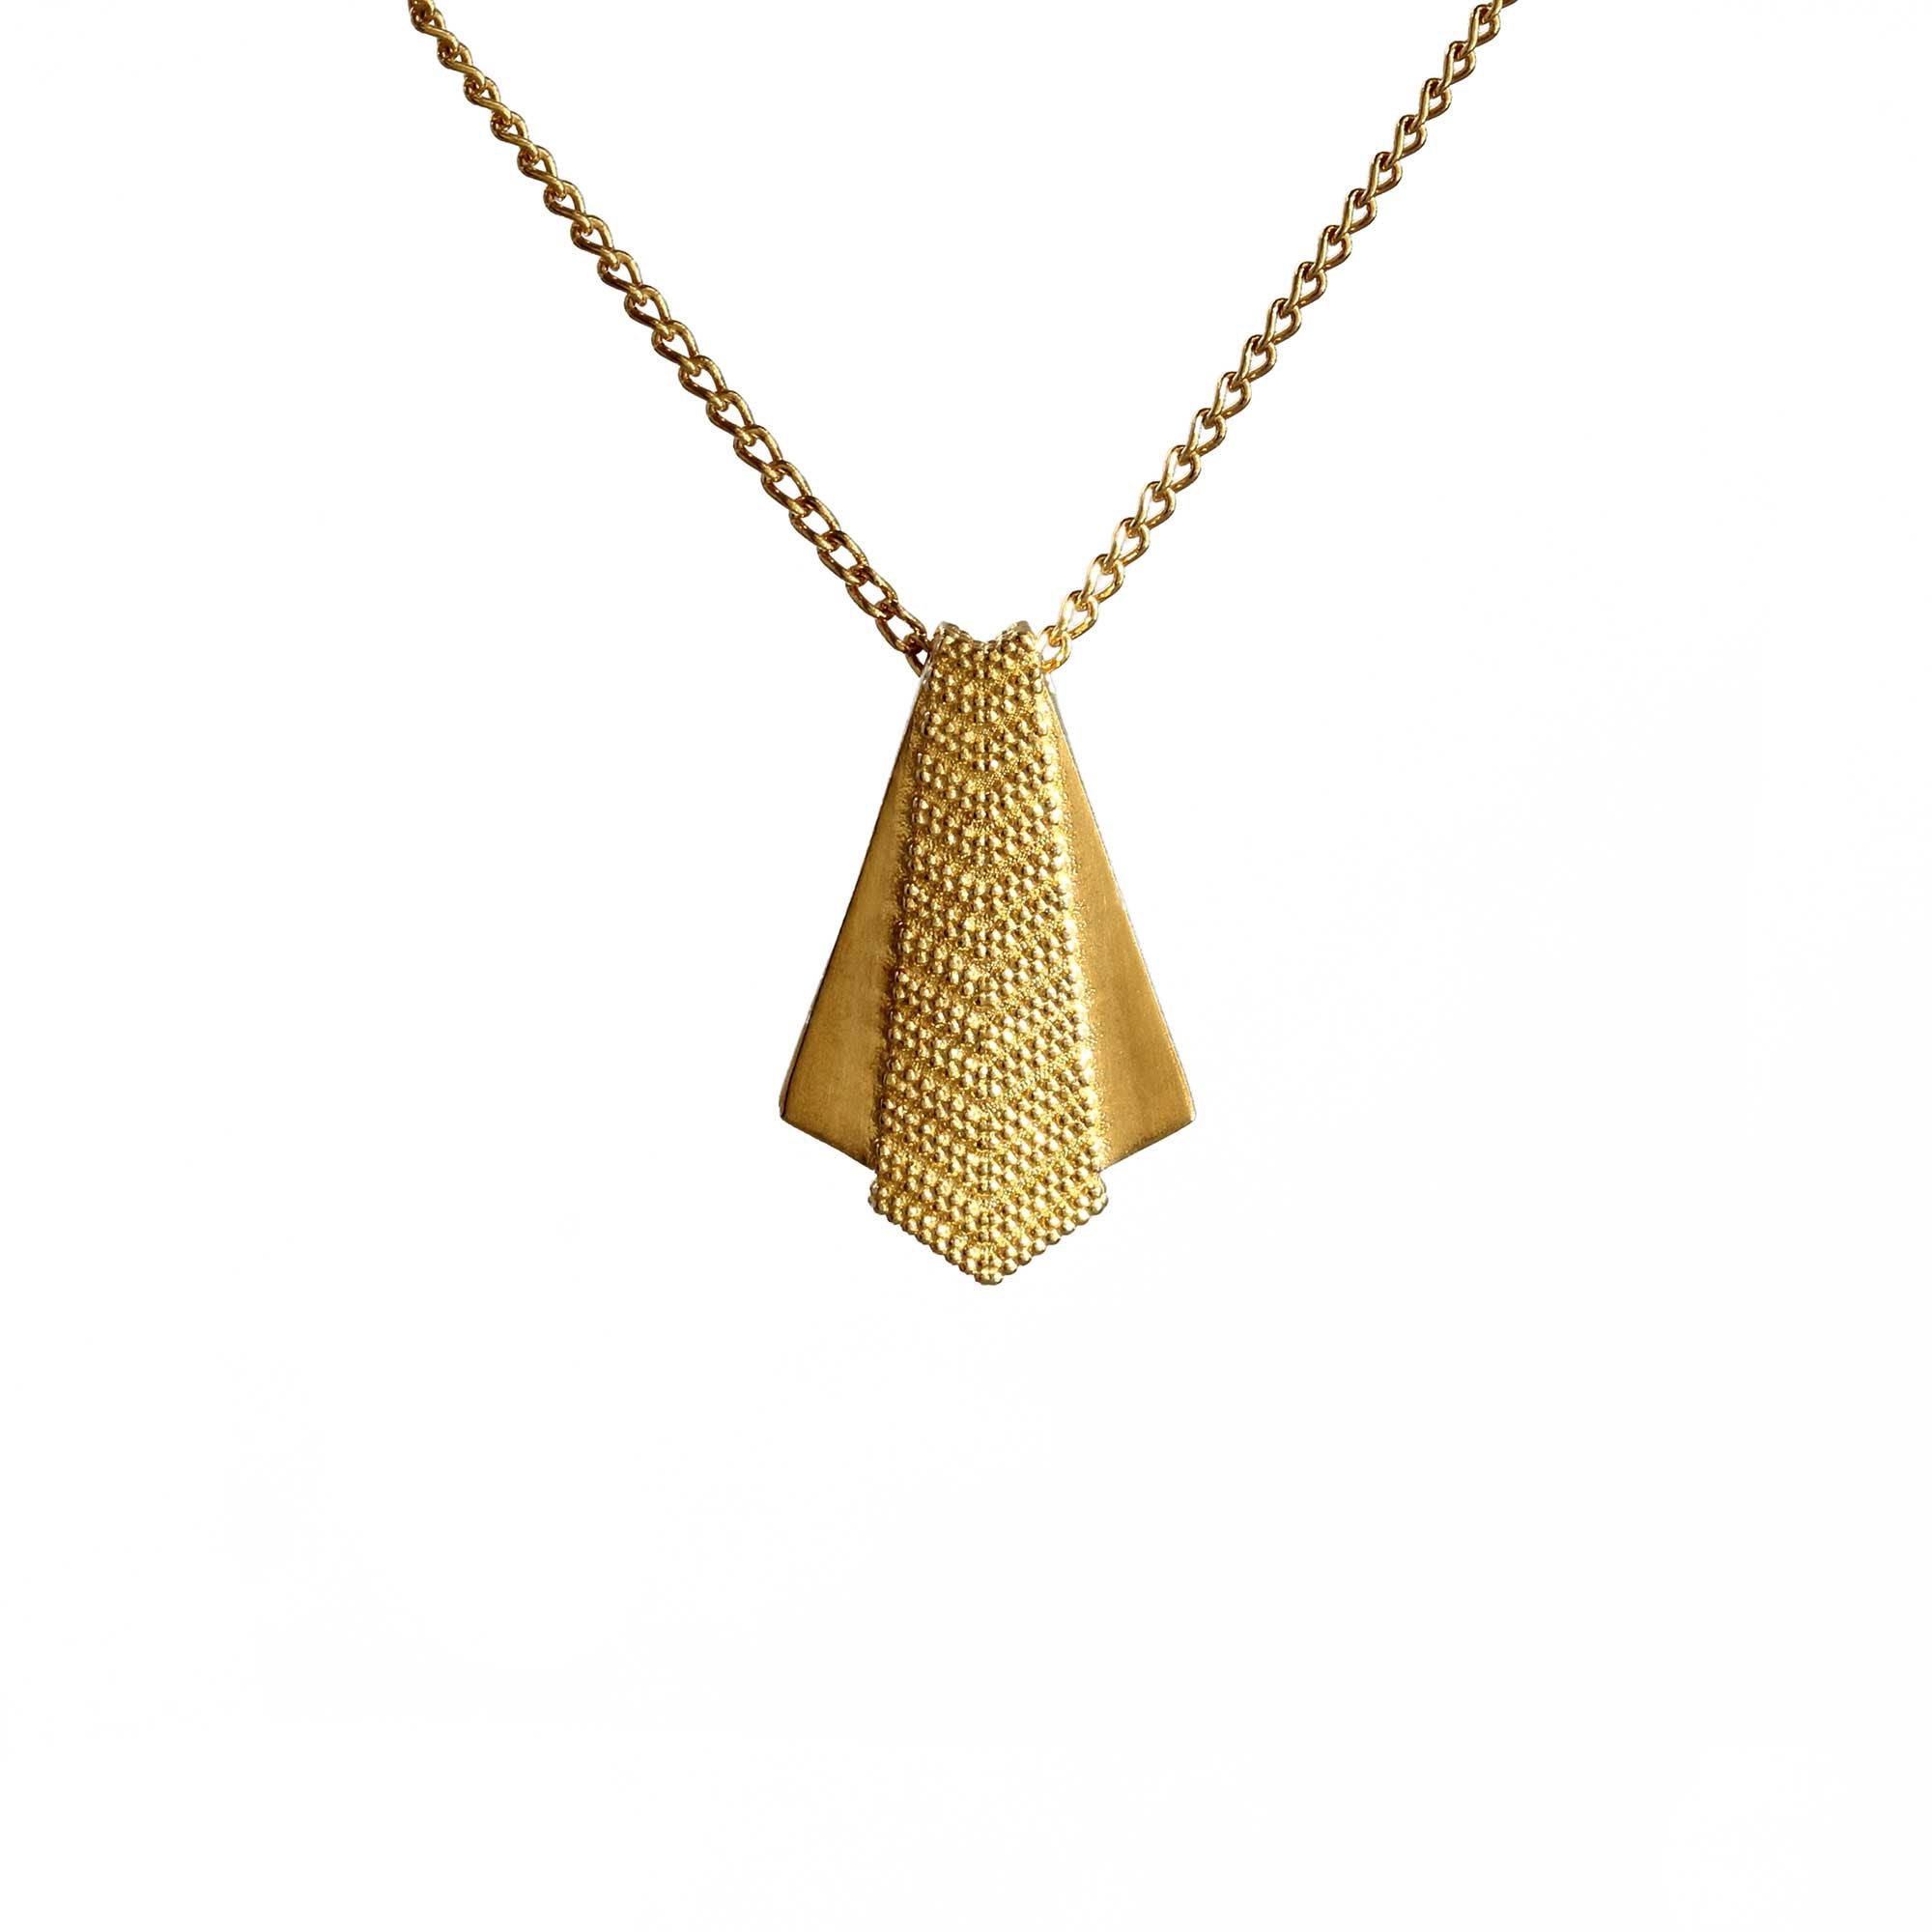 Ruptus textured chevron shaped yellow gold curb chain pendant necklace